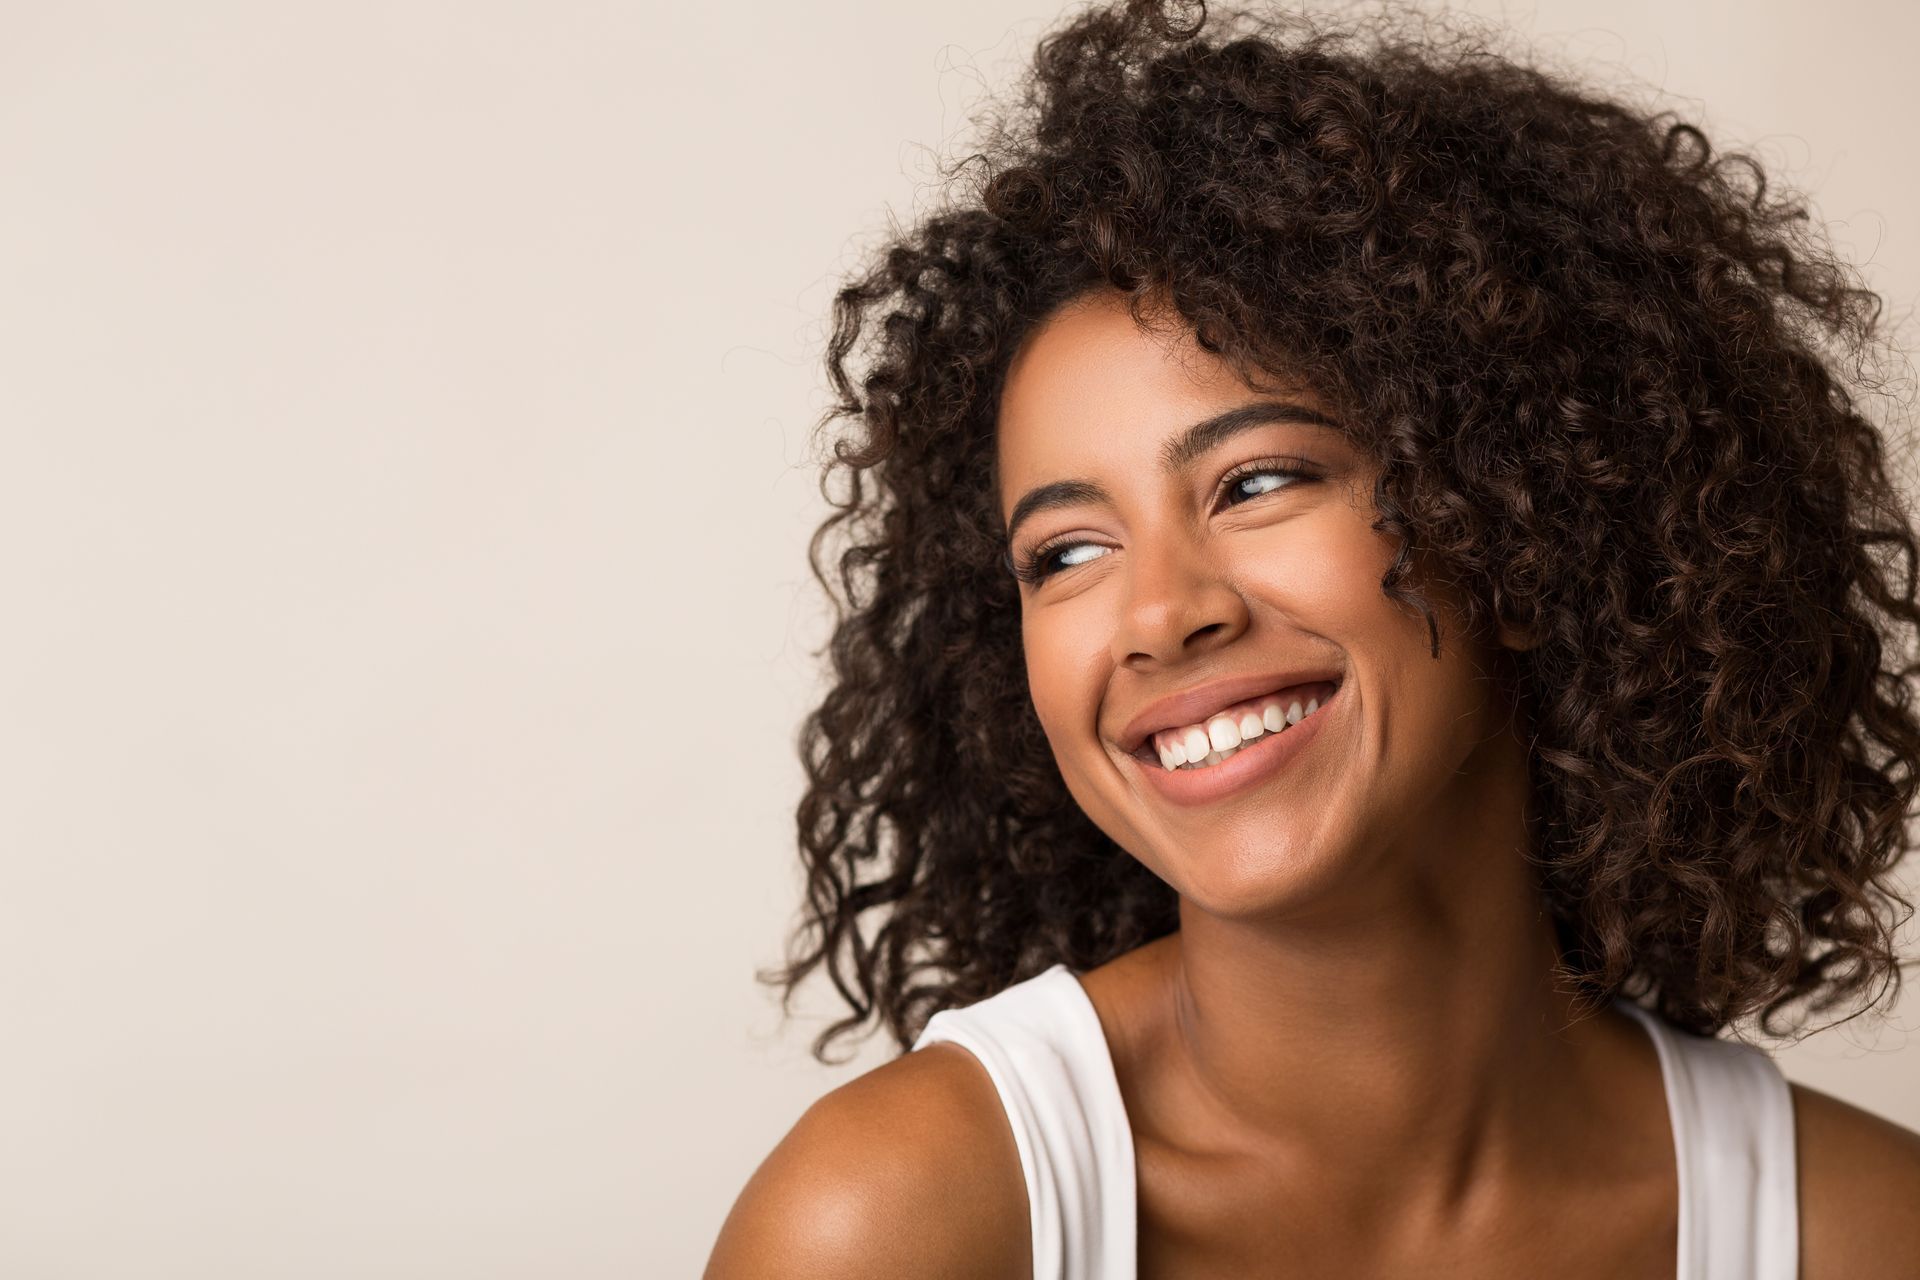 A woman with curly hair is smiling and looking to the side.